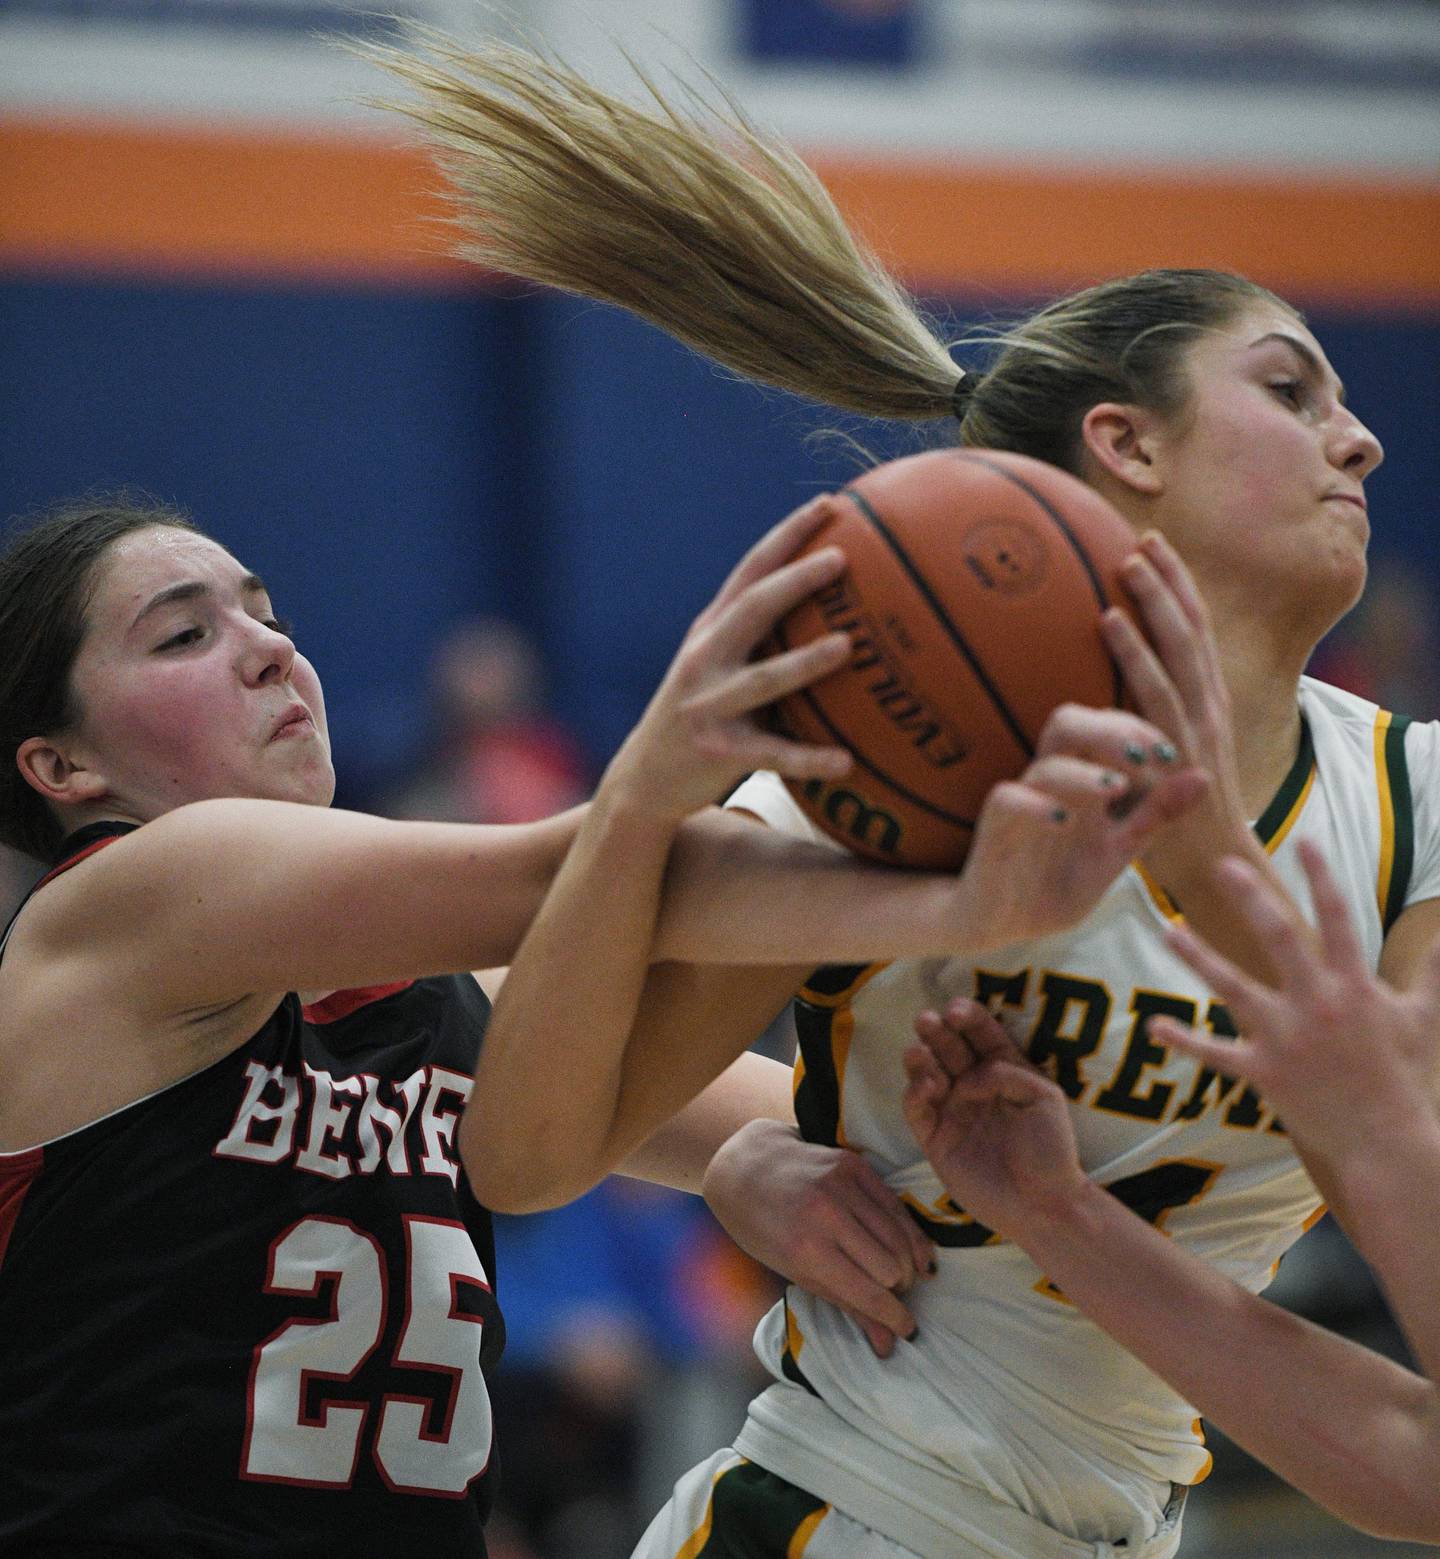 John Starks/jstarks@dailyherald.com
Fremd’s Brynn Eshoo, right, and Benet’s Samantha Trimberger battle for the ball in the semifinal game of the Morton College girls basketball tournament in Cicero on Thursday, December 29, 2022.